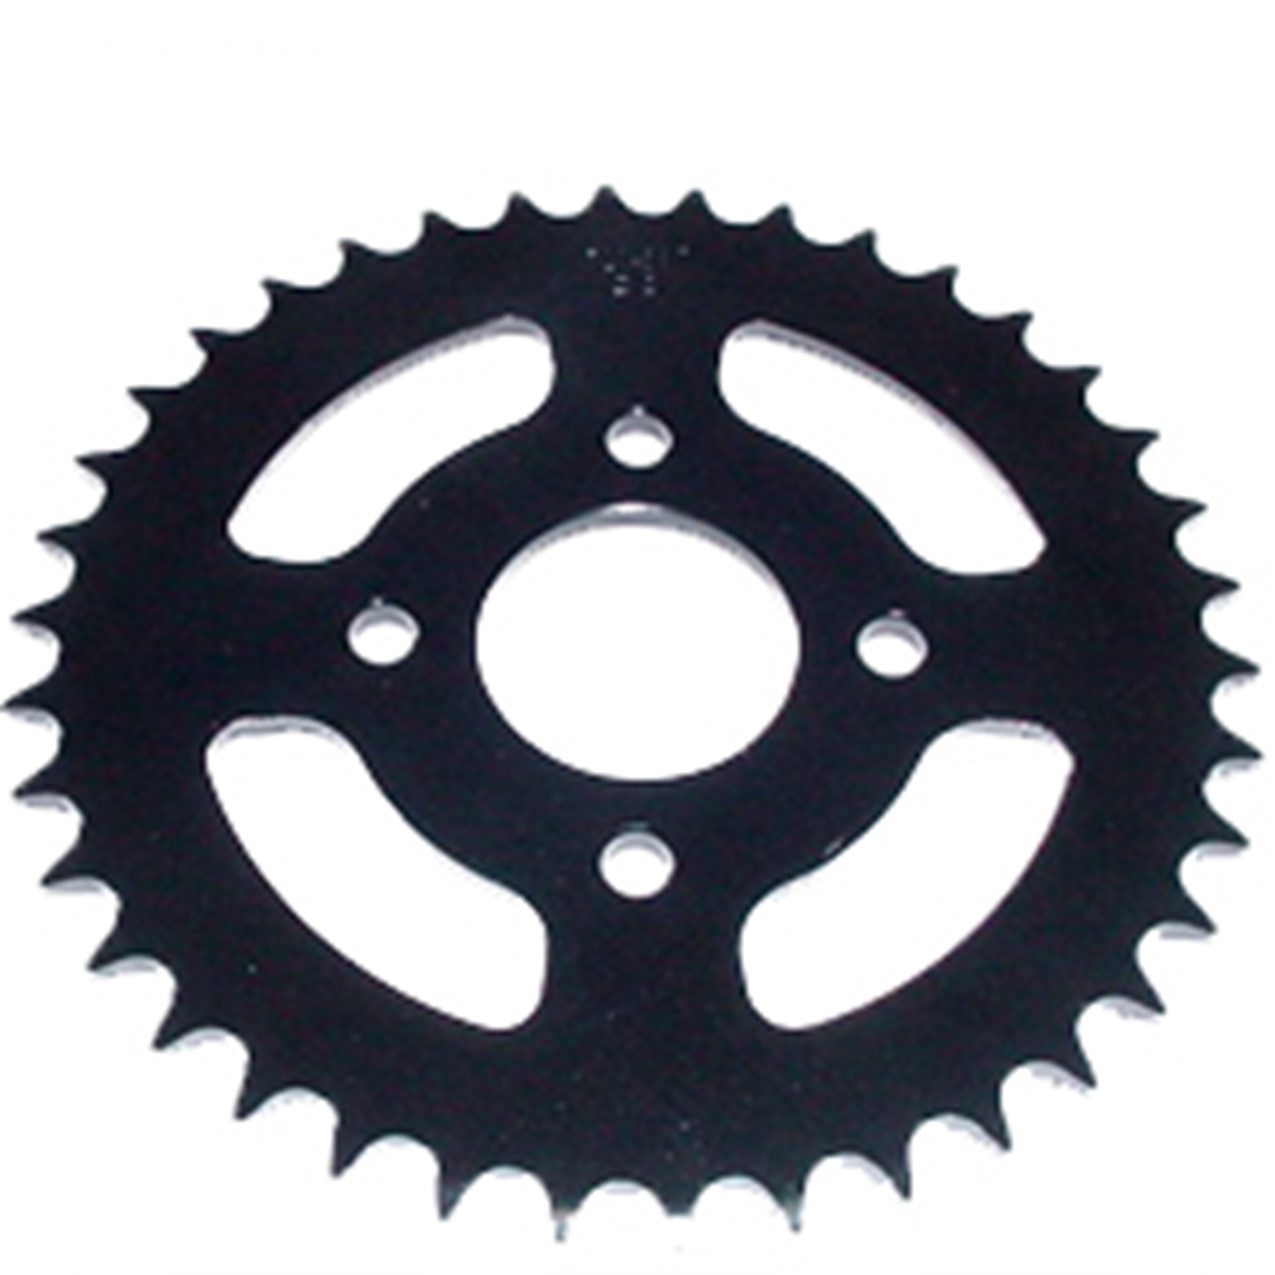 Rear Sprocket #520 40th Bolt Pattern=4x80mm (55mm to adjacent hole), Shaft=50mm Fits E-Ton Vector 250 ATVs + More